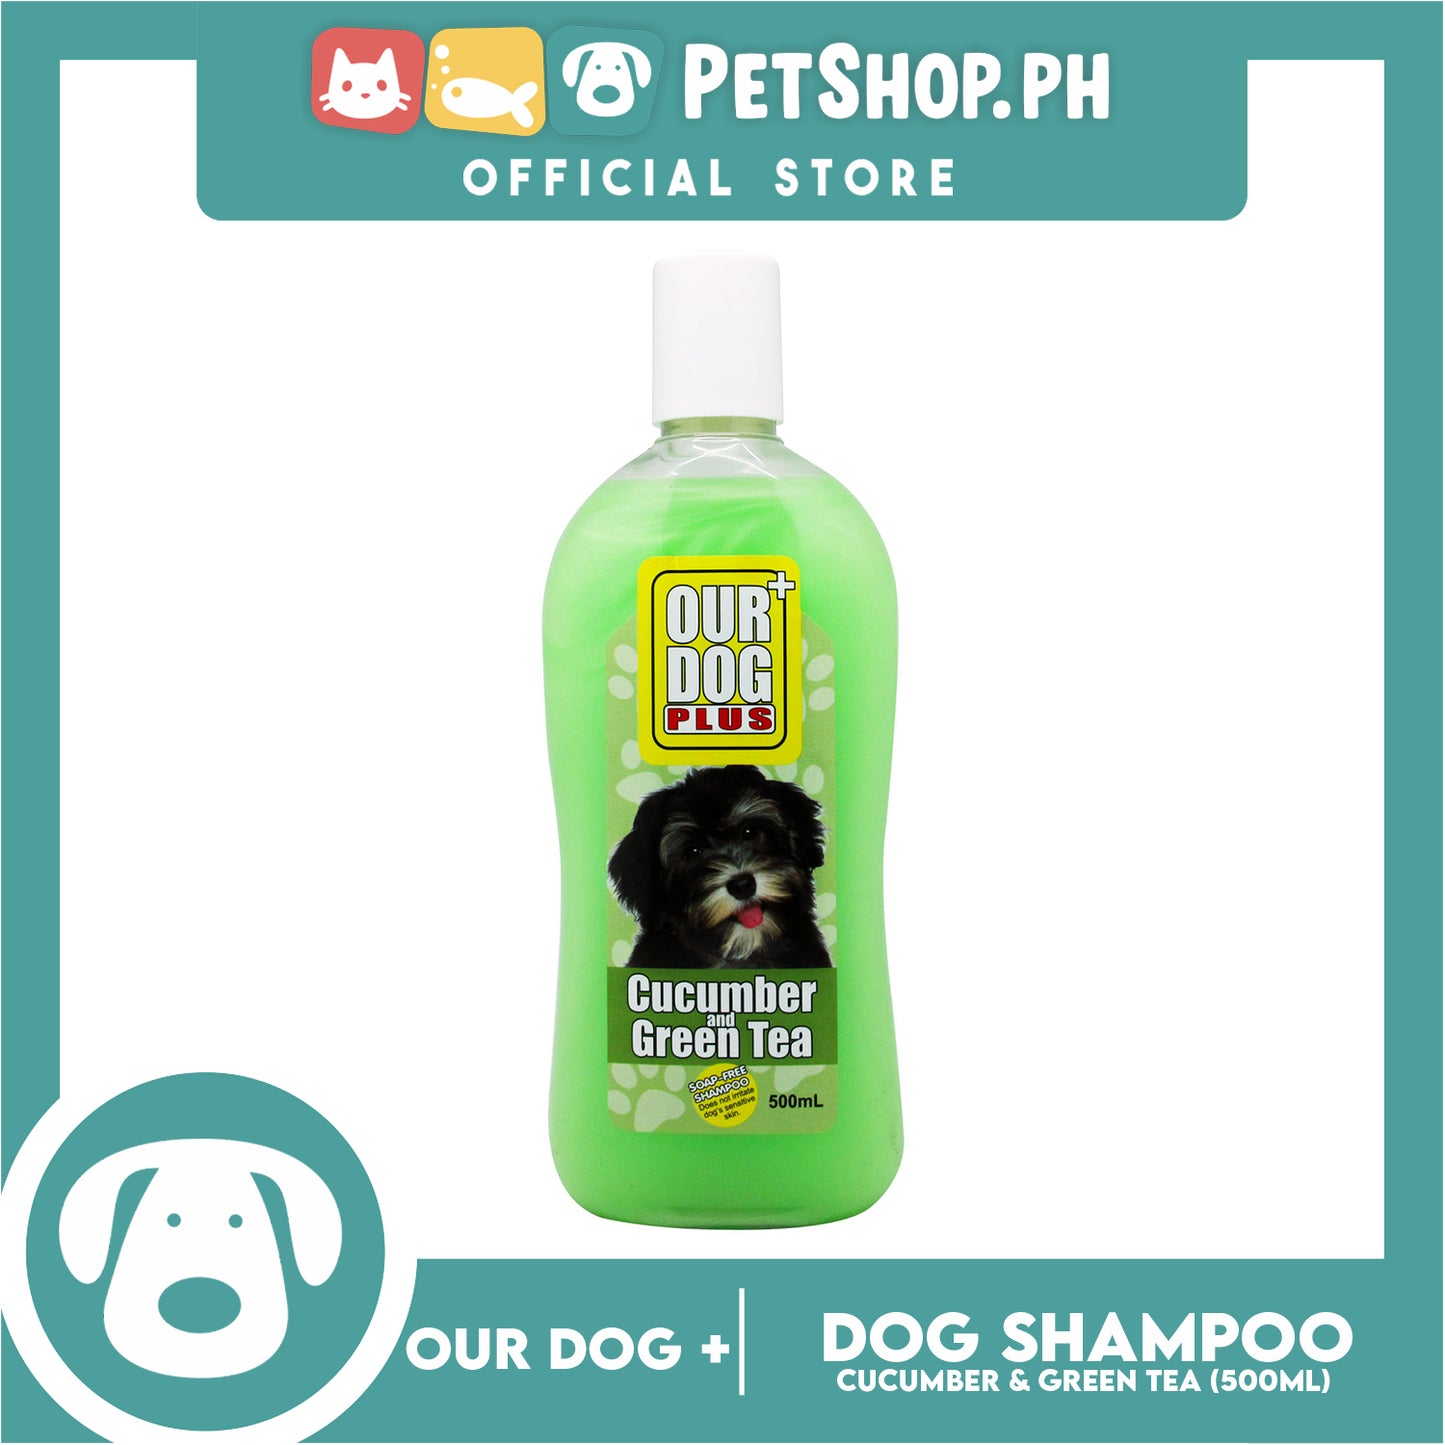 Our Dog Plus Cucumber and Green Tea Shampoo 500ml for Dogs